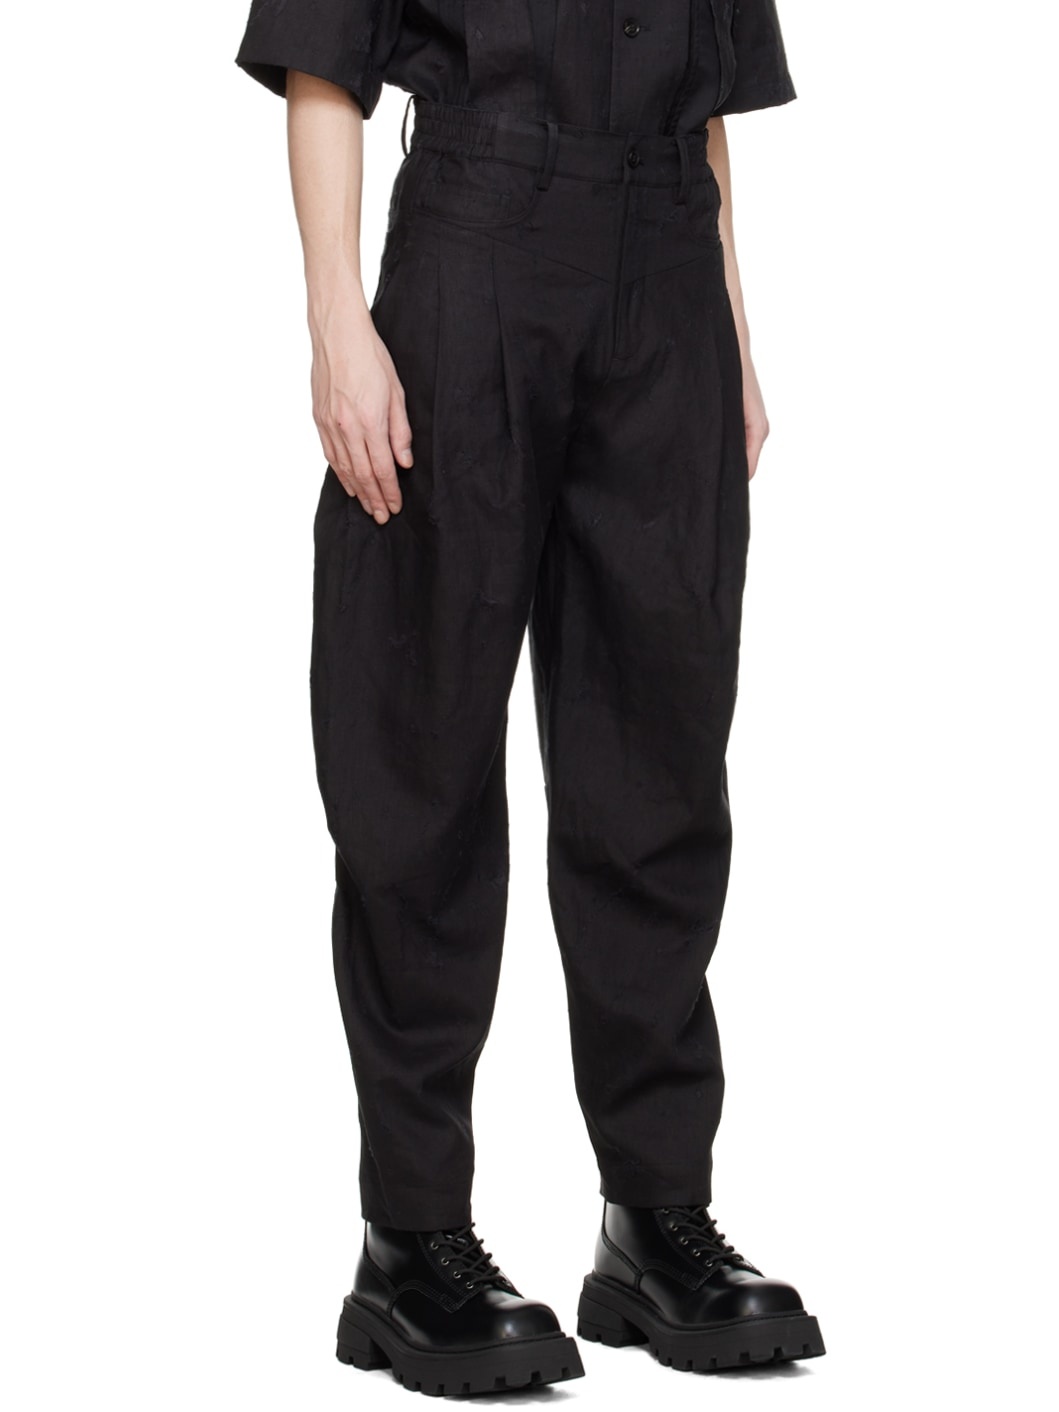 Black Distressed Trousers - 2